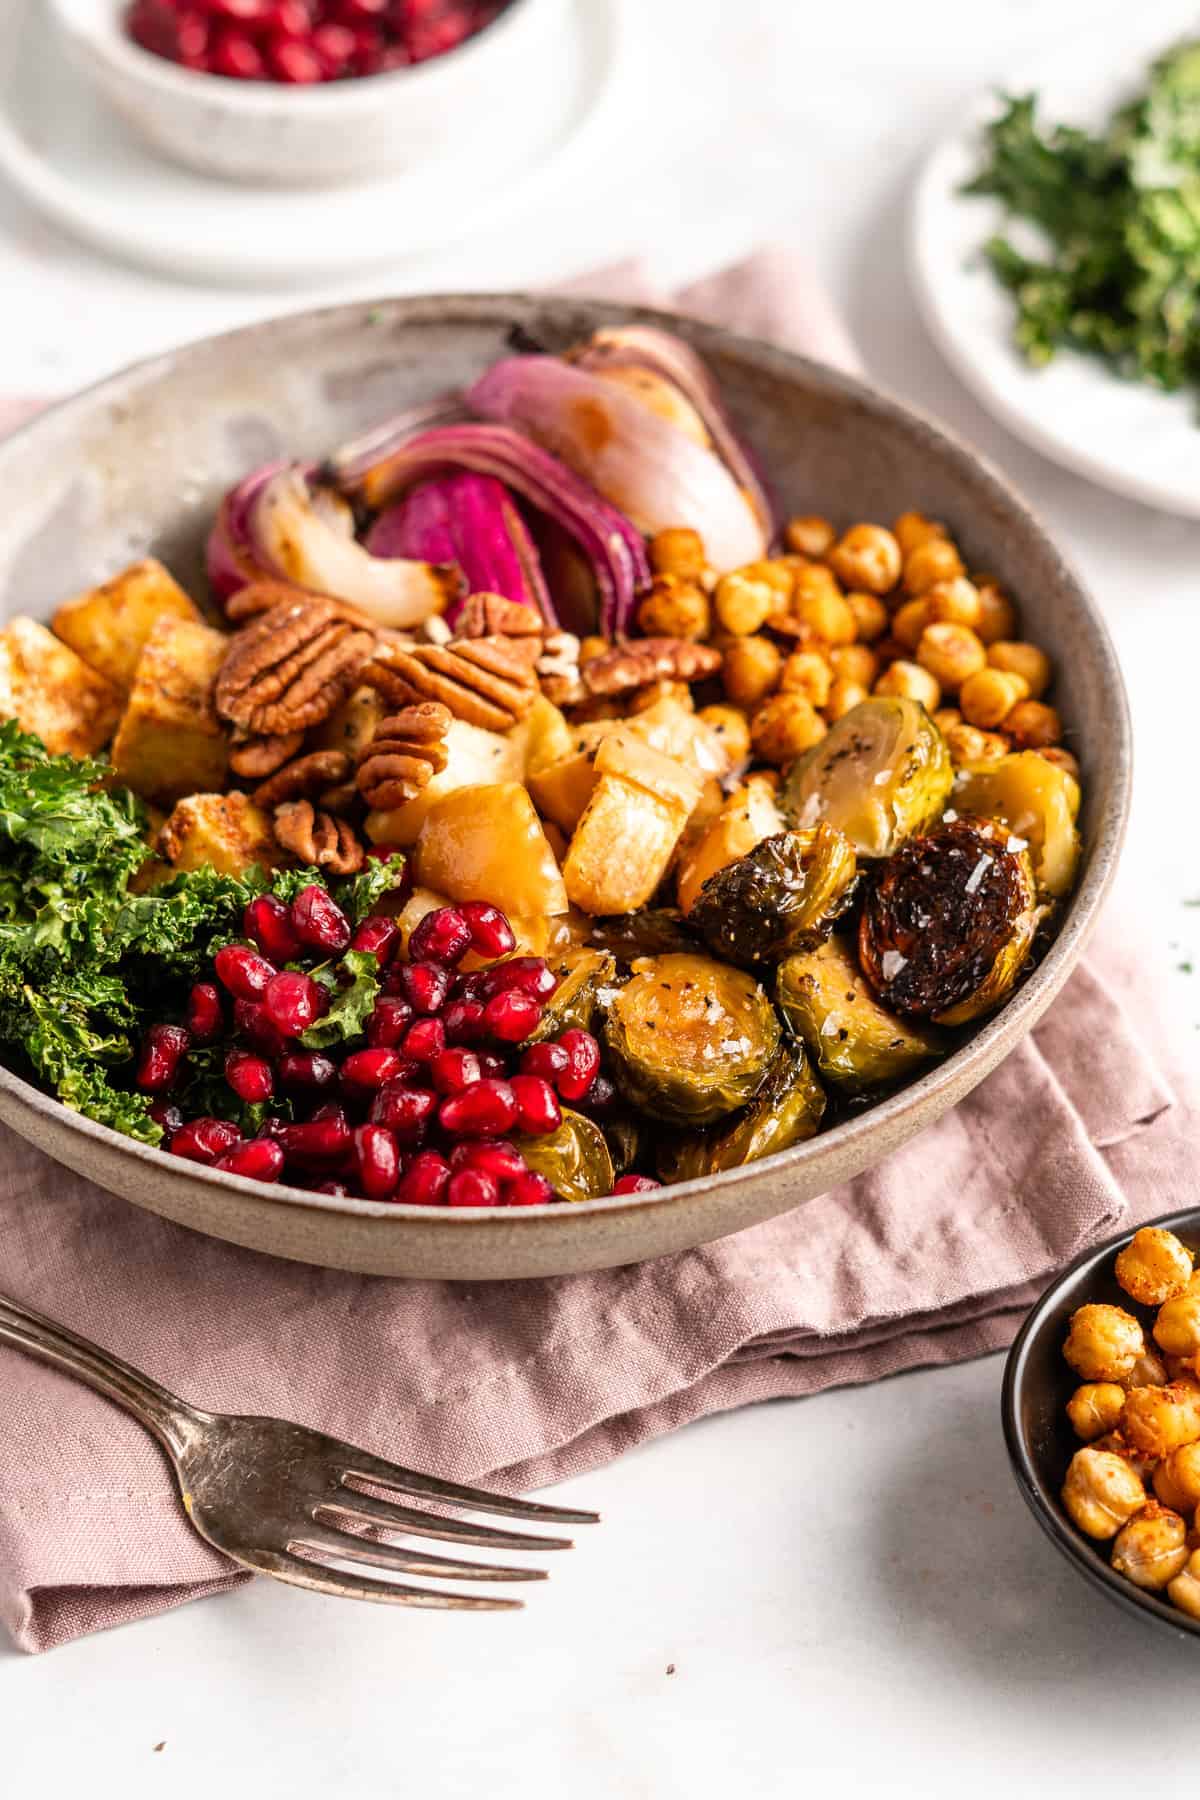 Buddha bowl filled with pomegranate arils, kale, Brussels sprouts, chickpeas, tofu, apples, and onions